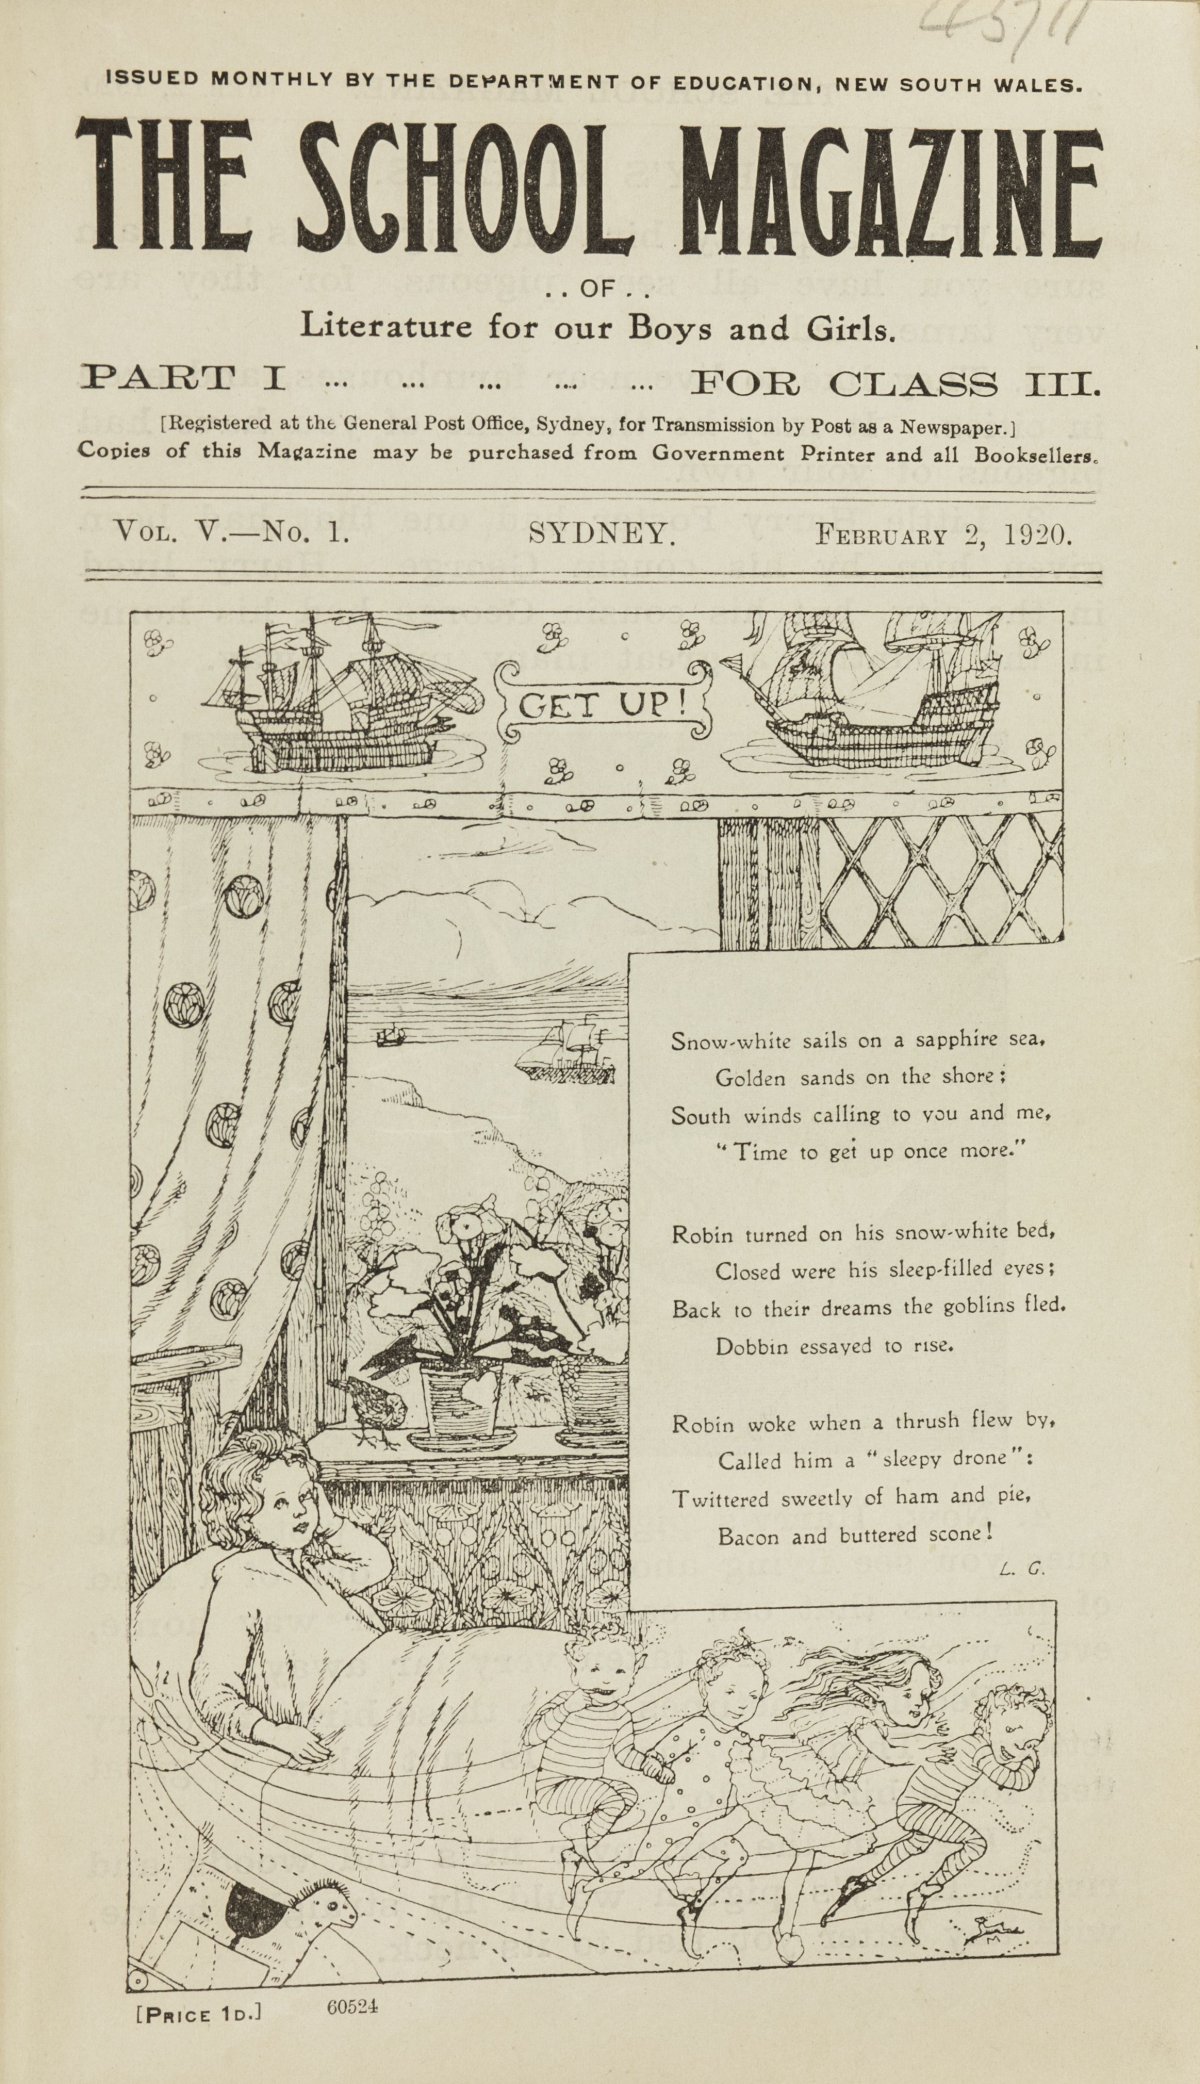 Front cover image of The School Magazine of Literature for Out Boys and Girls, 7 February 1920 issue